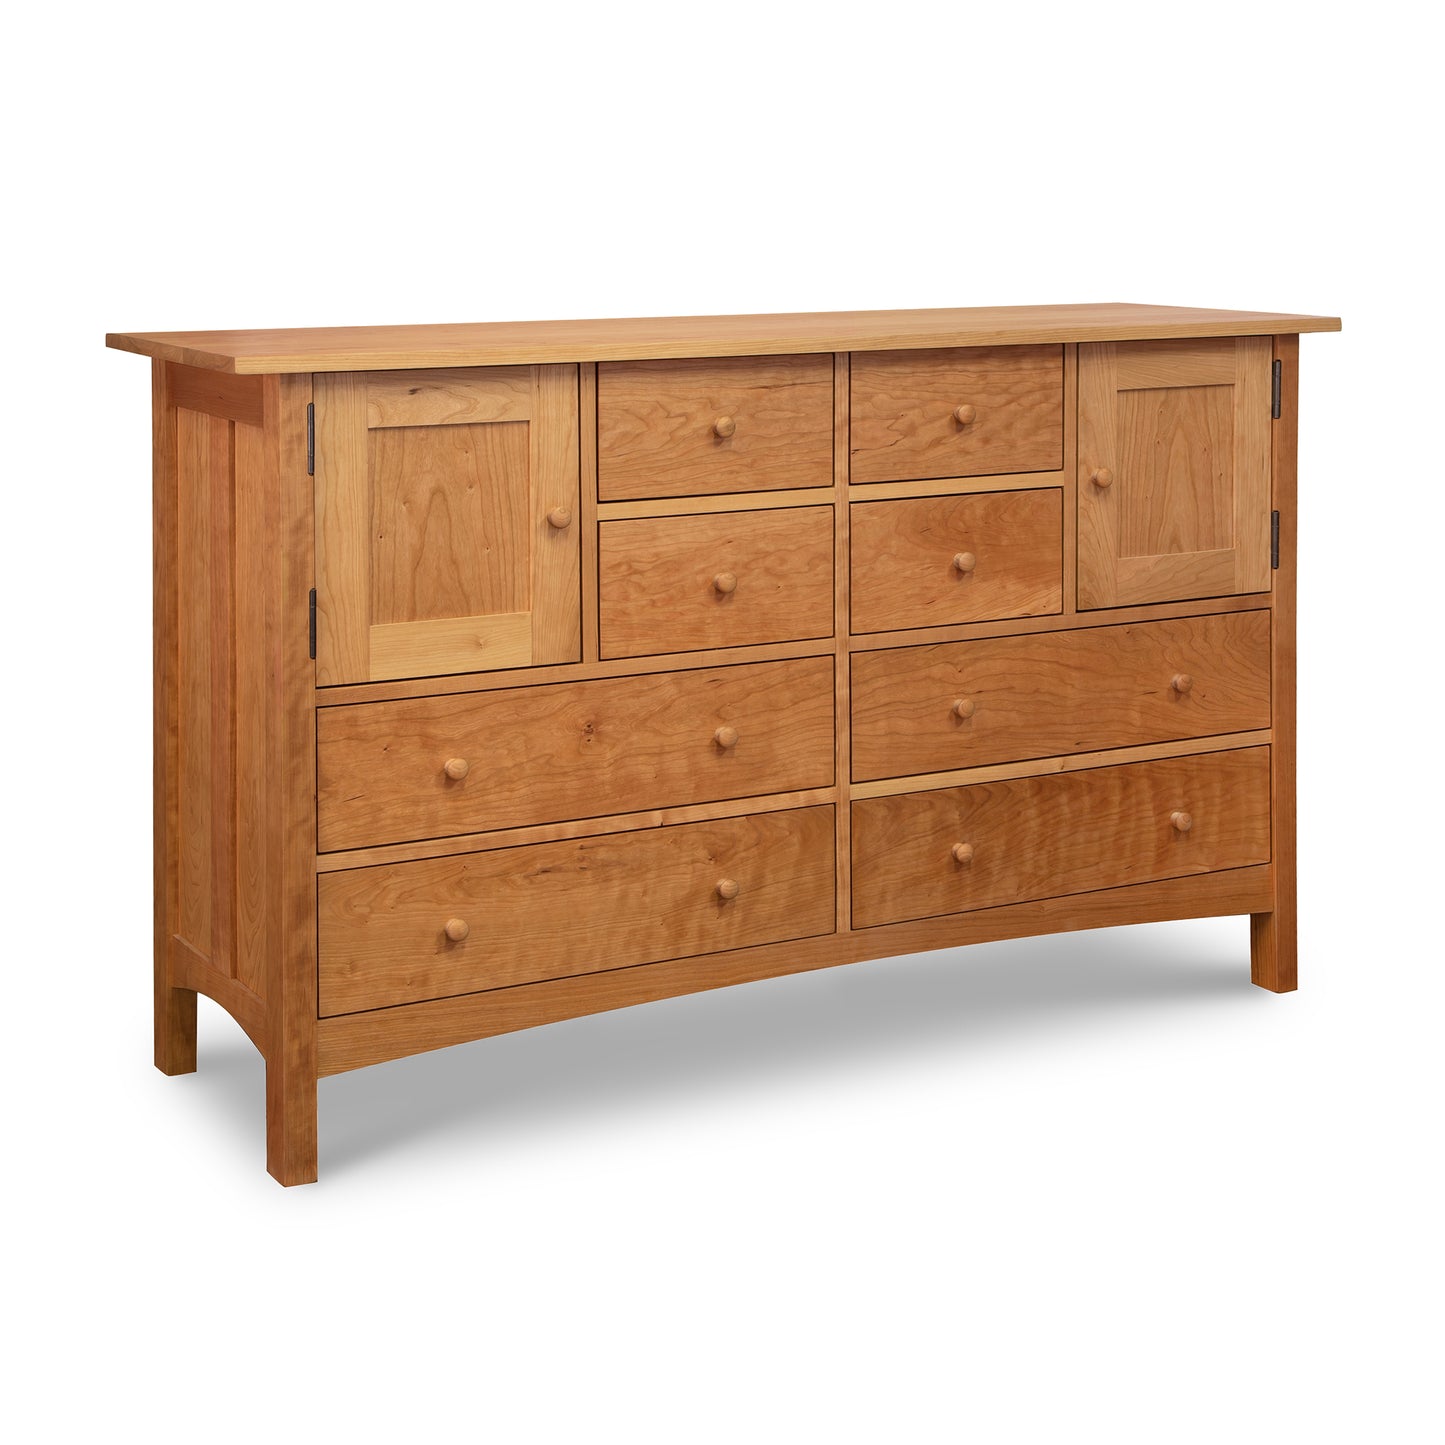 A luxury dresser, specifically the Burlington Shaker 8-Drawer 2-Door Dresser made by Vermont Furniture Designs, made of wood and featuring several drawers.